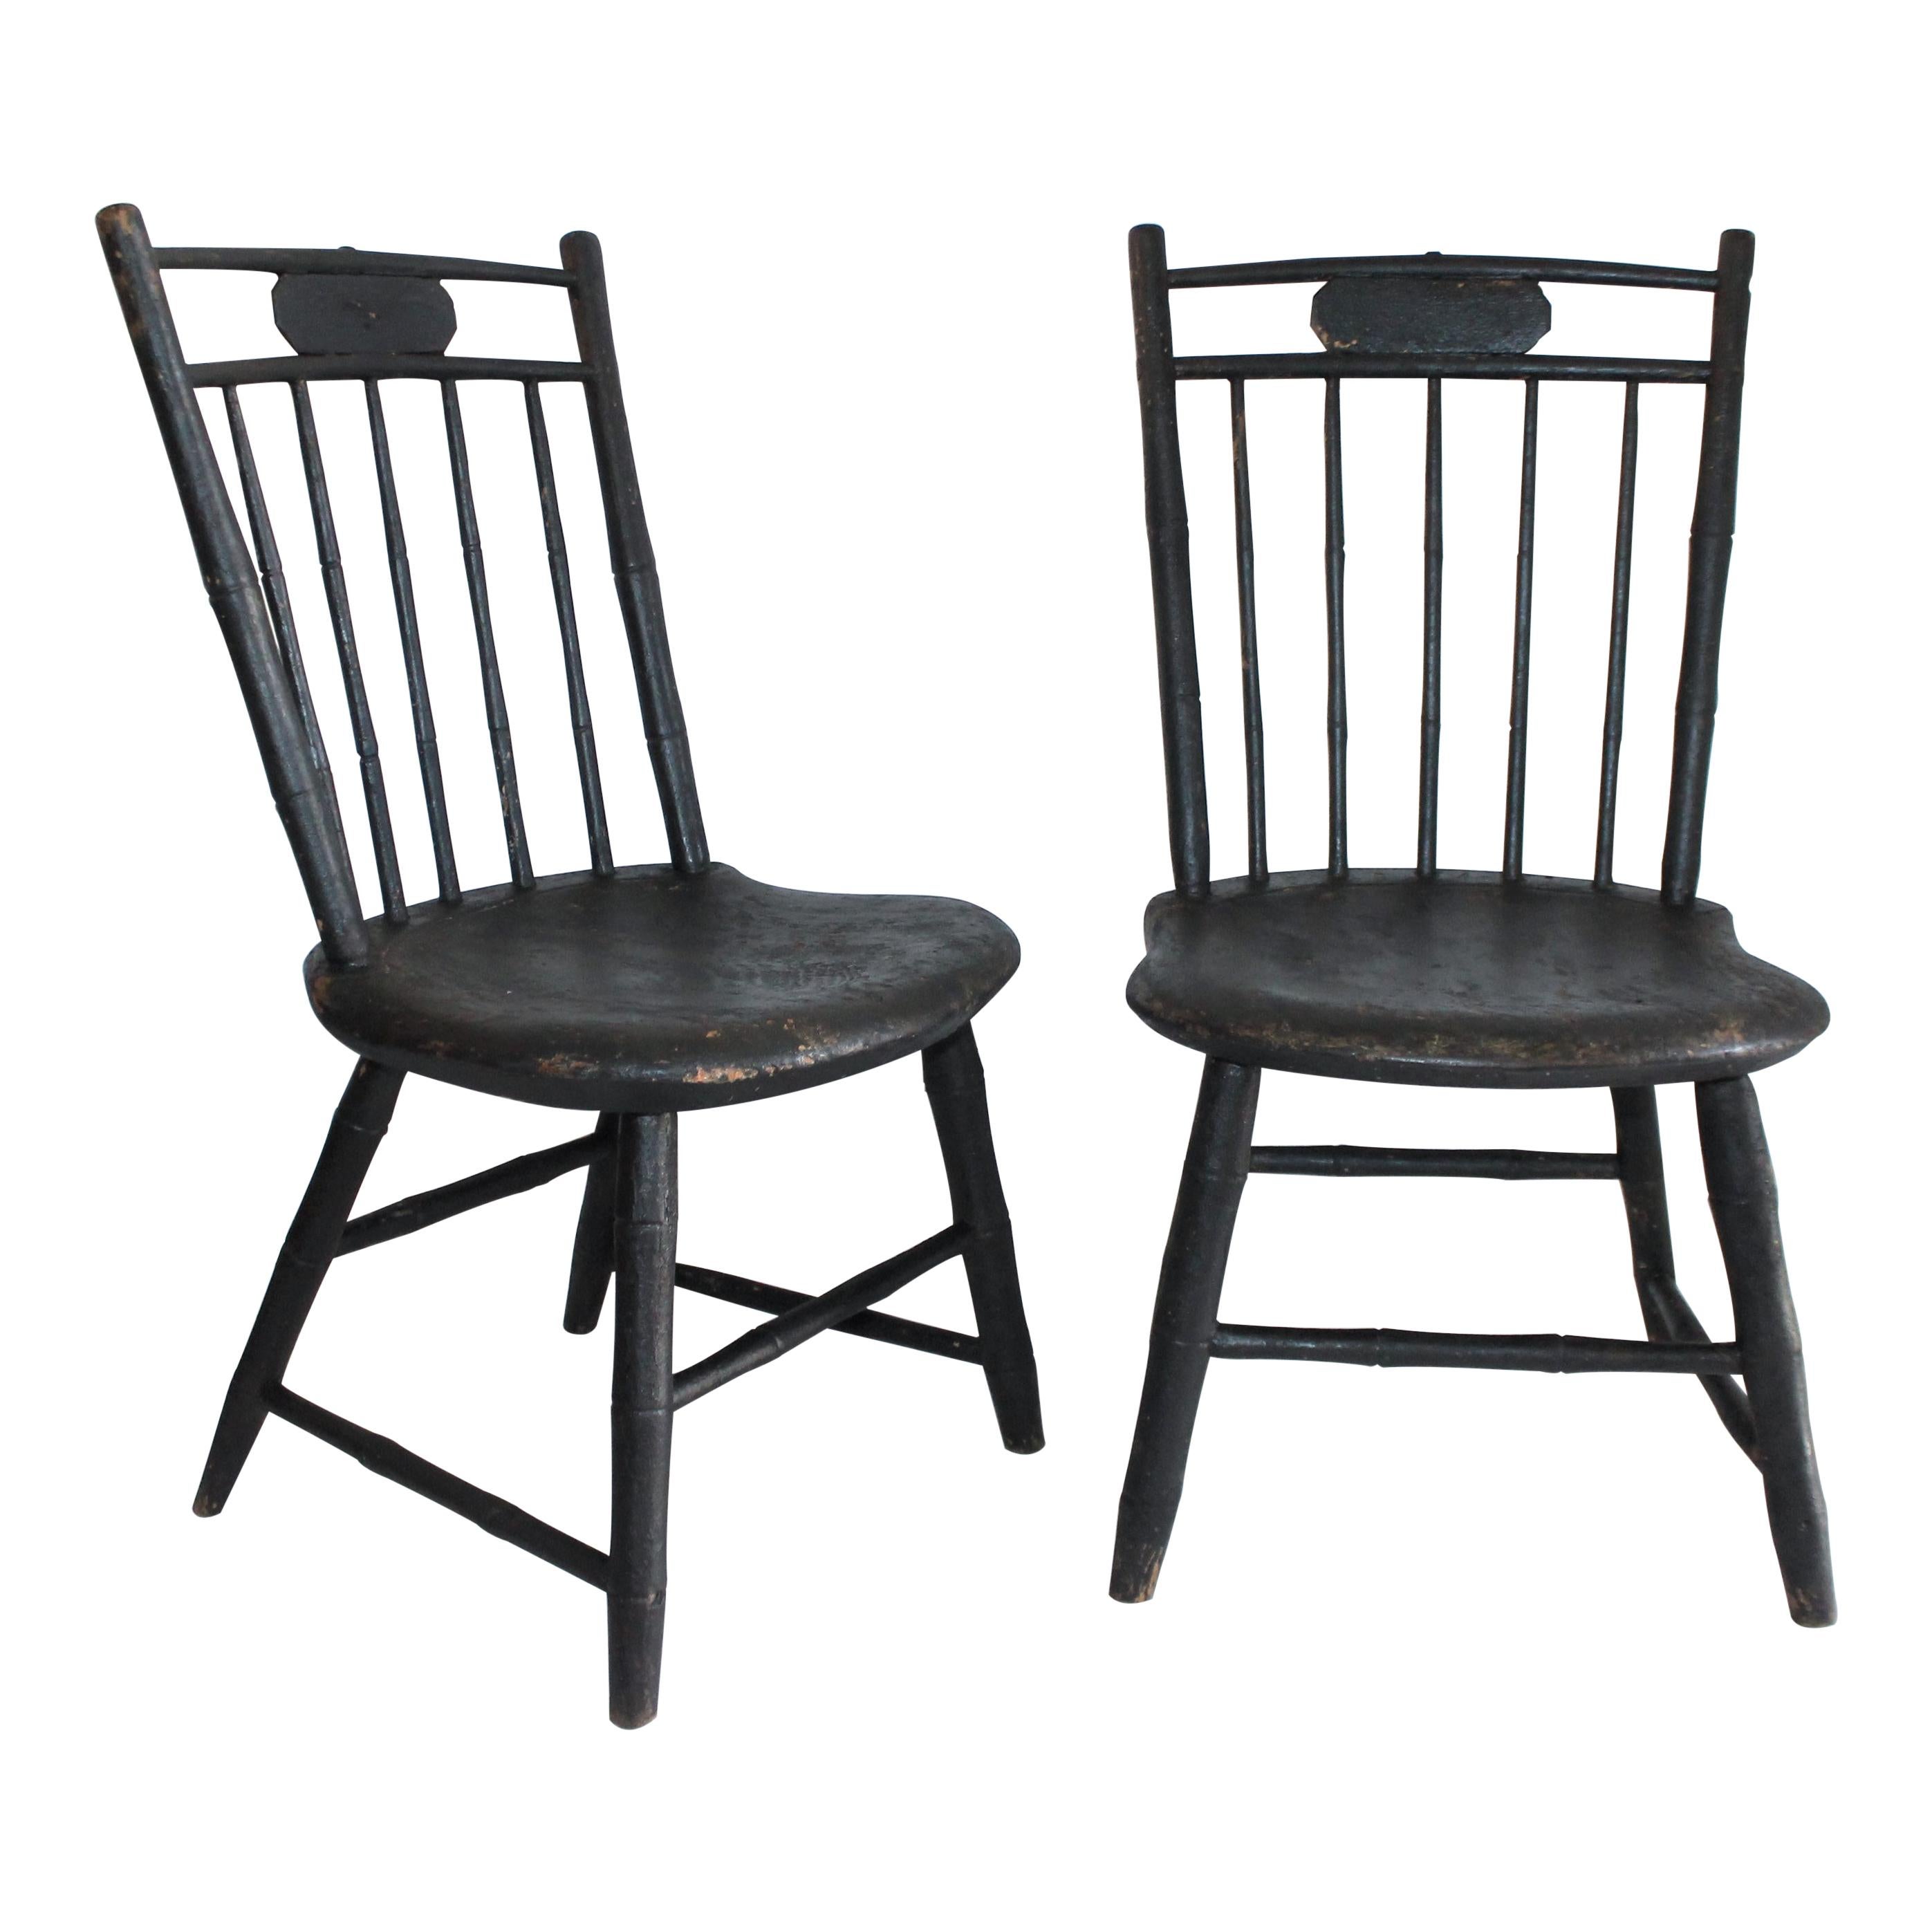 19th Century Windsor Children's Chairs in Black Painted Surface, Pair